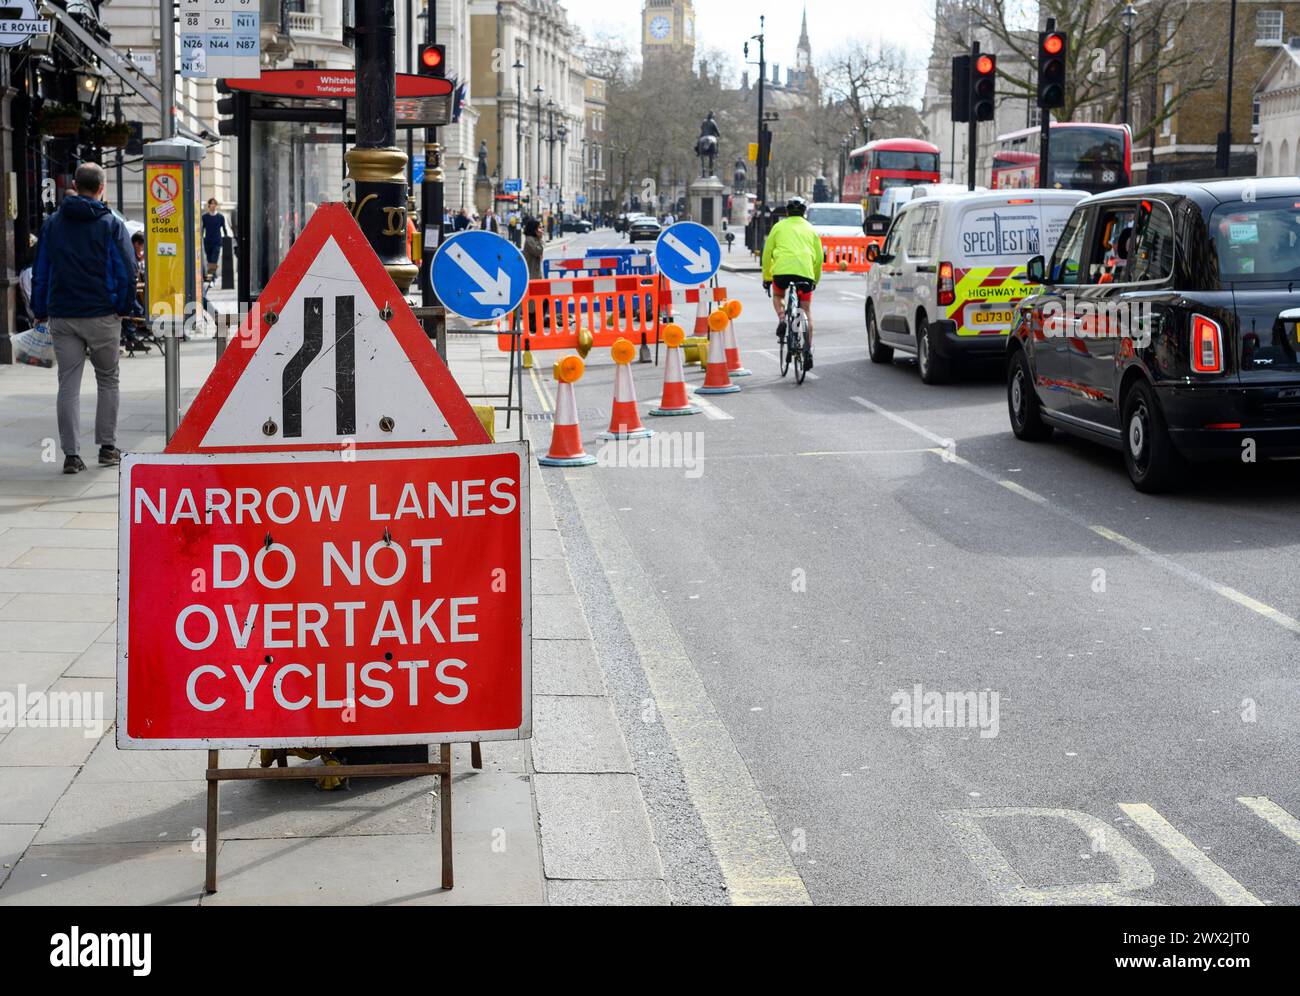 London, UK. Traffic sign in Whtiehall, Westminster, warning not to overtake bicycles. Stock Photo